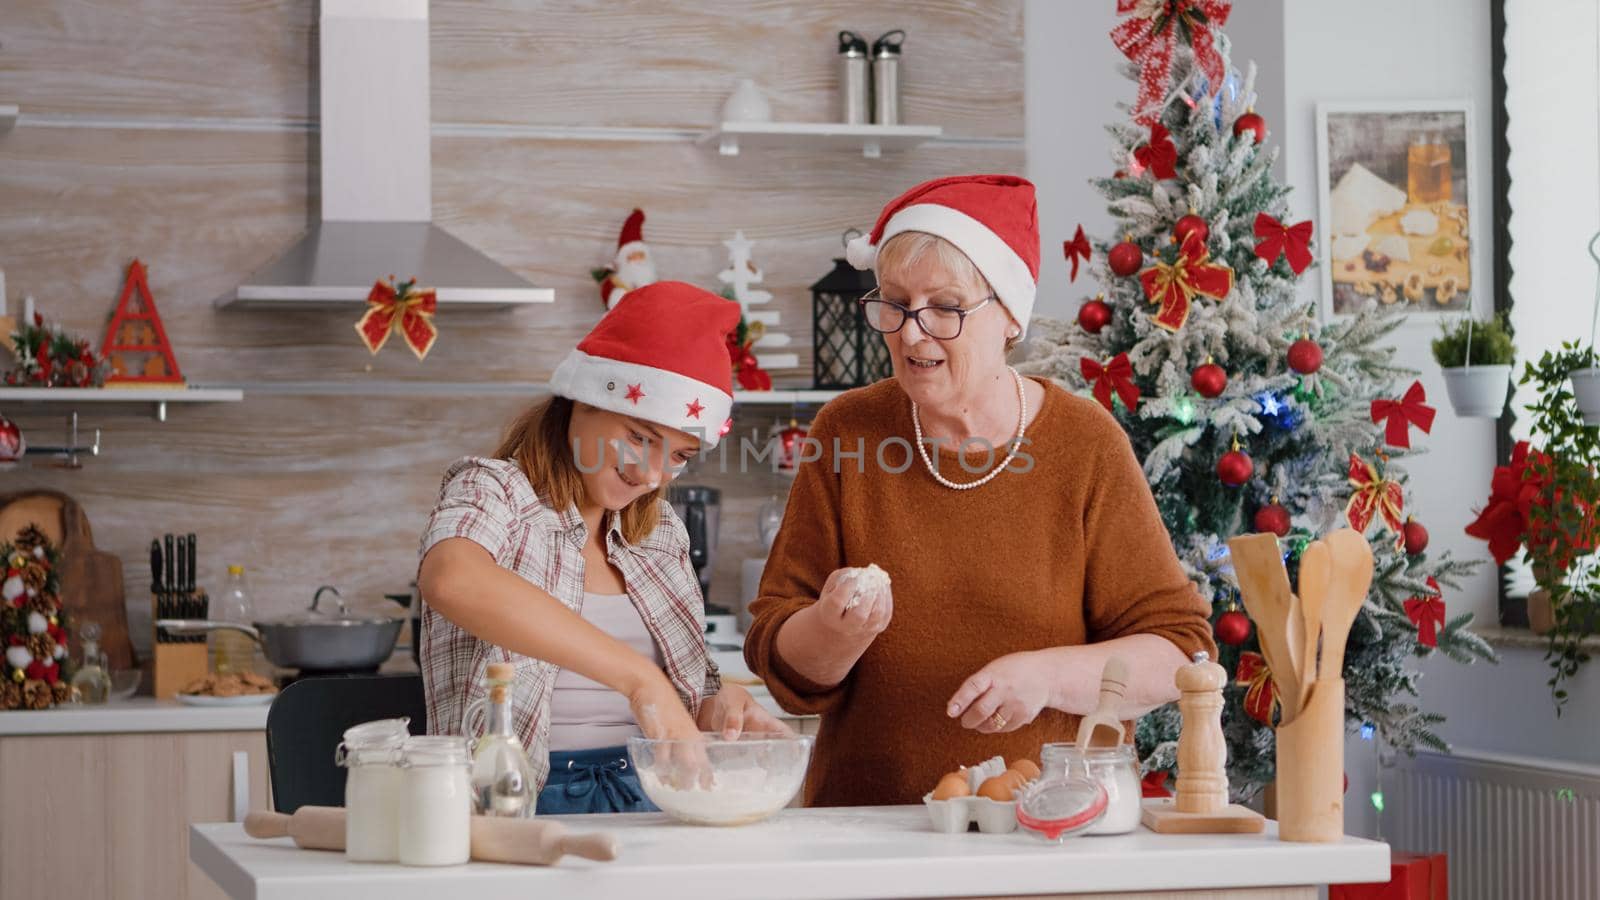 Grandparent helping grandchild preparing homemade traditional cookie dough in culinary kitchen during christmas holiday. Family wearing xmas hat enjoying cooking together making delicious dessert